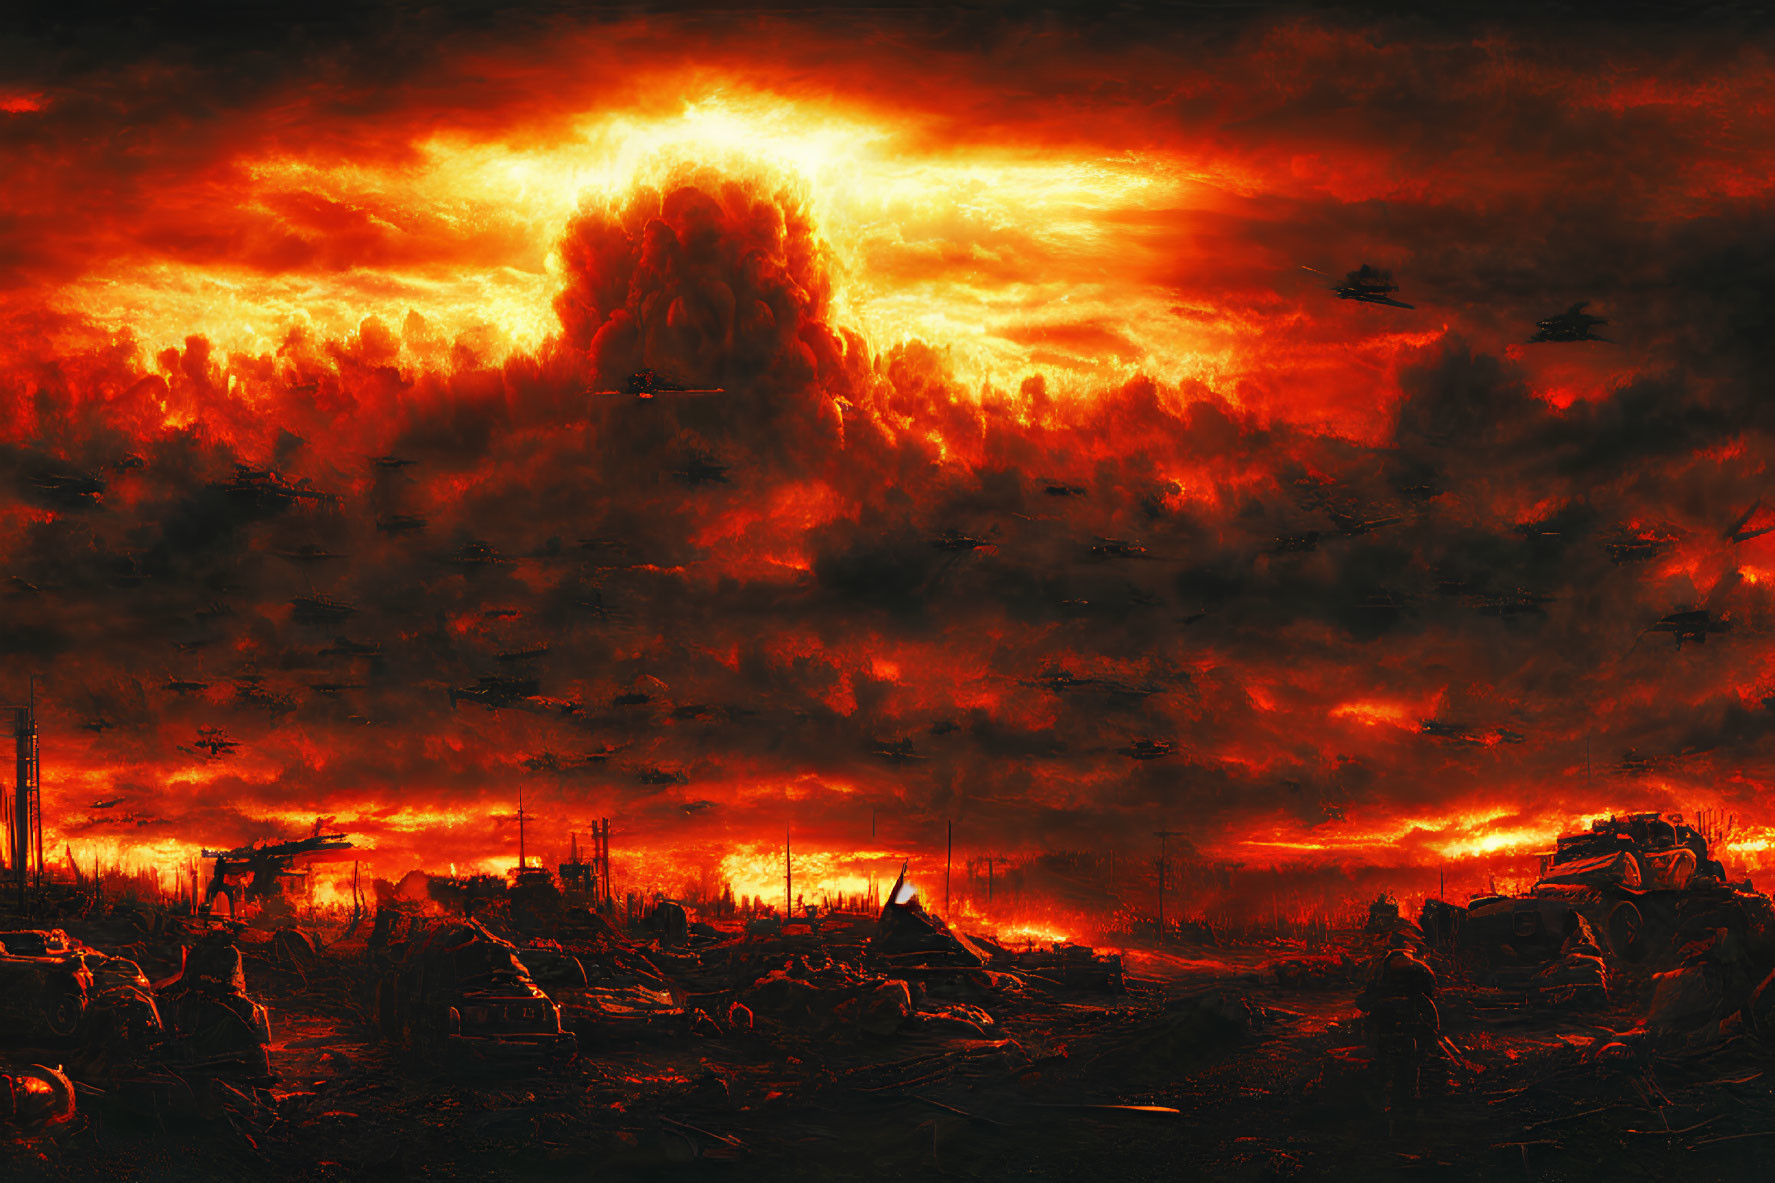 Dystopian scene with fiery sky, mushroom cloud, military aircraft, tanks, and ruins